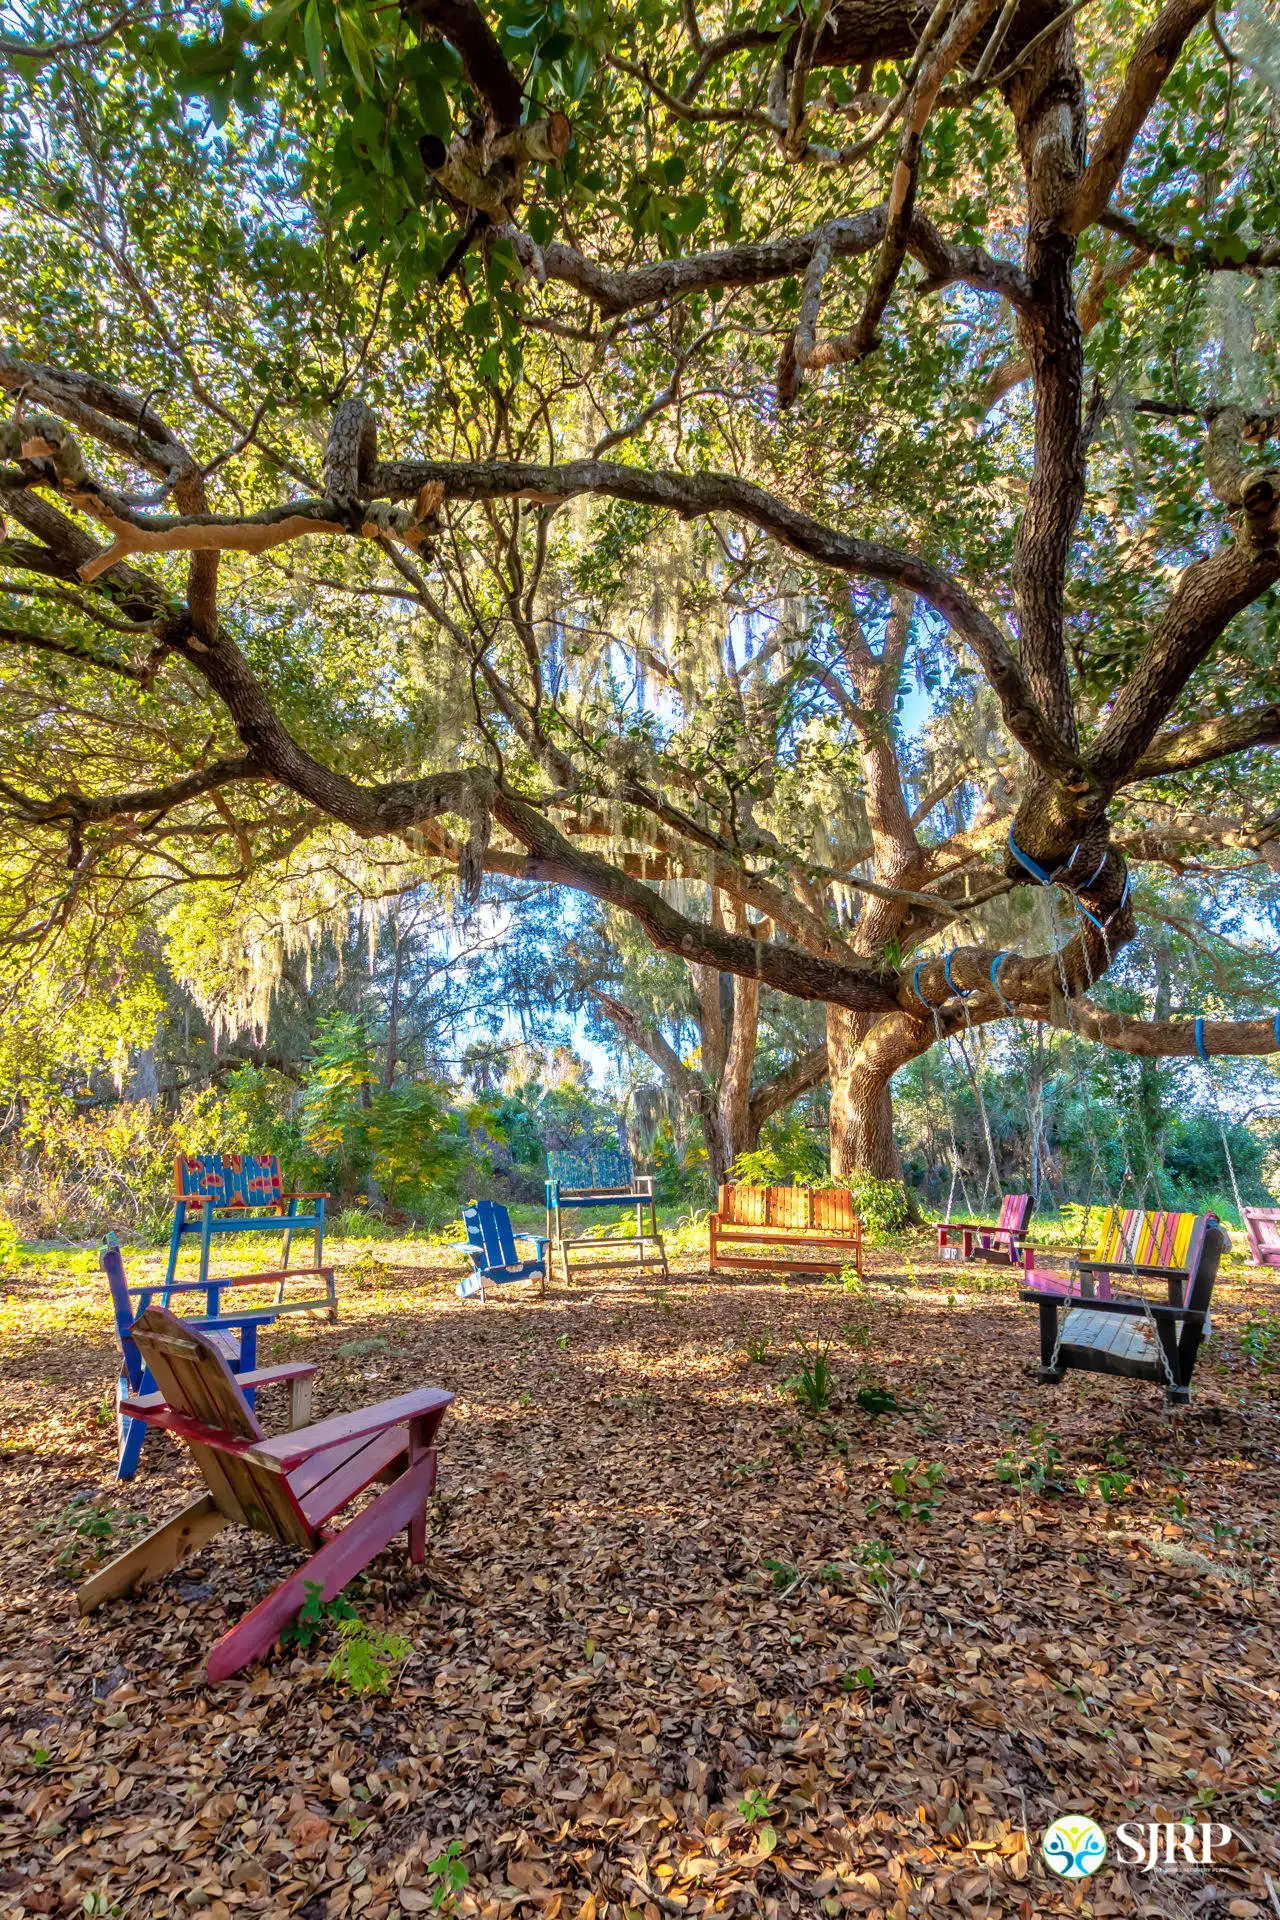 Sprawling oak tree with colorful Adirondack chairs and tree swings arranged in a circle under the tree.